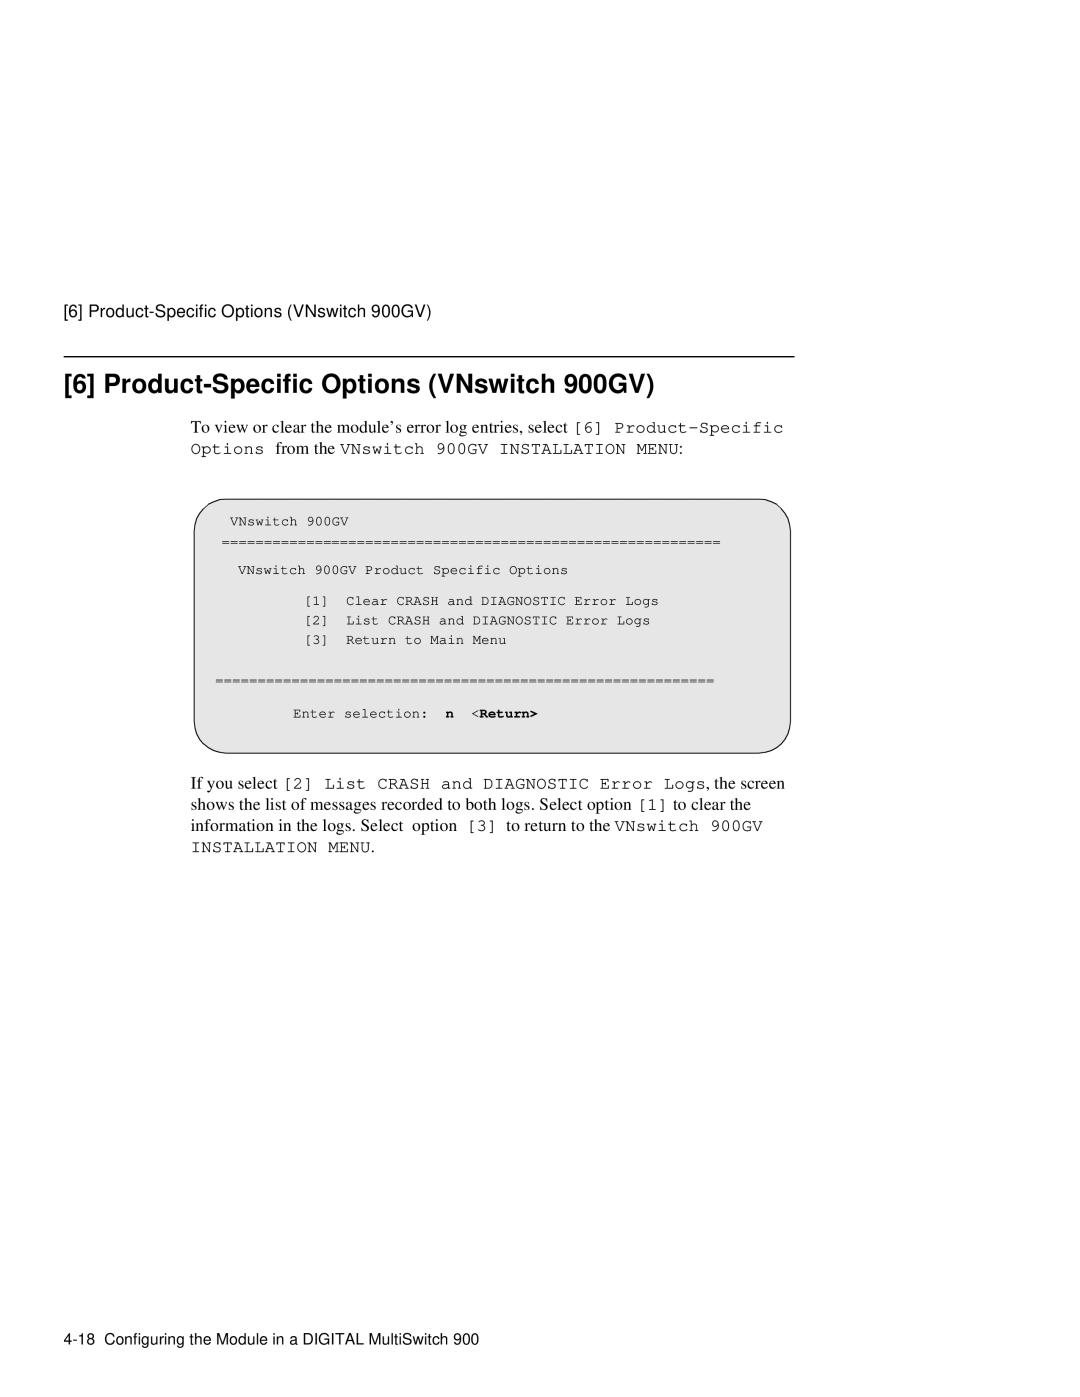 Network Technologies manual Product-Specific Options VNswitch 900GV, Options from the VNswitch 900GV Installation Menu 